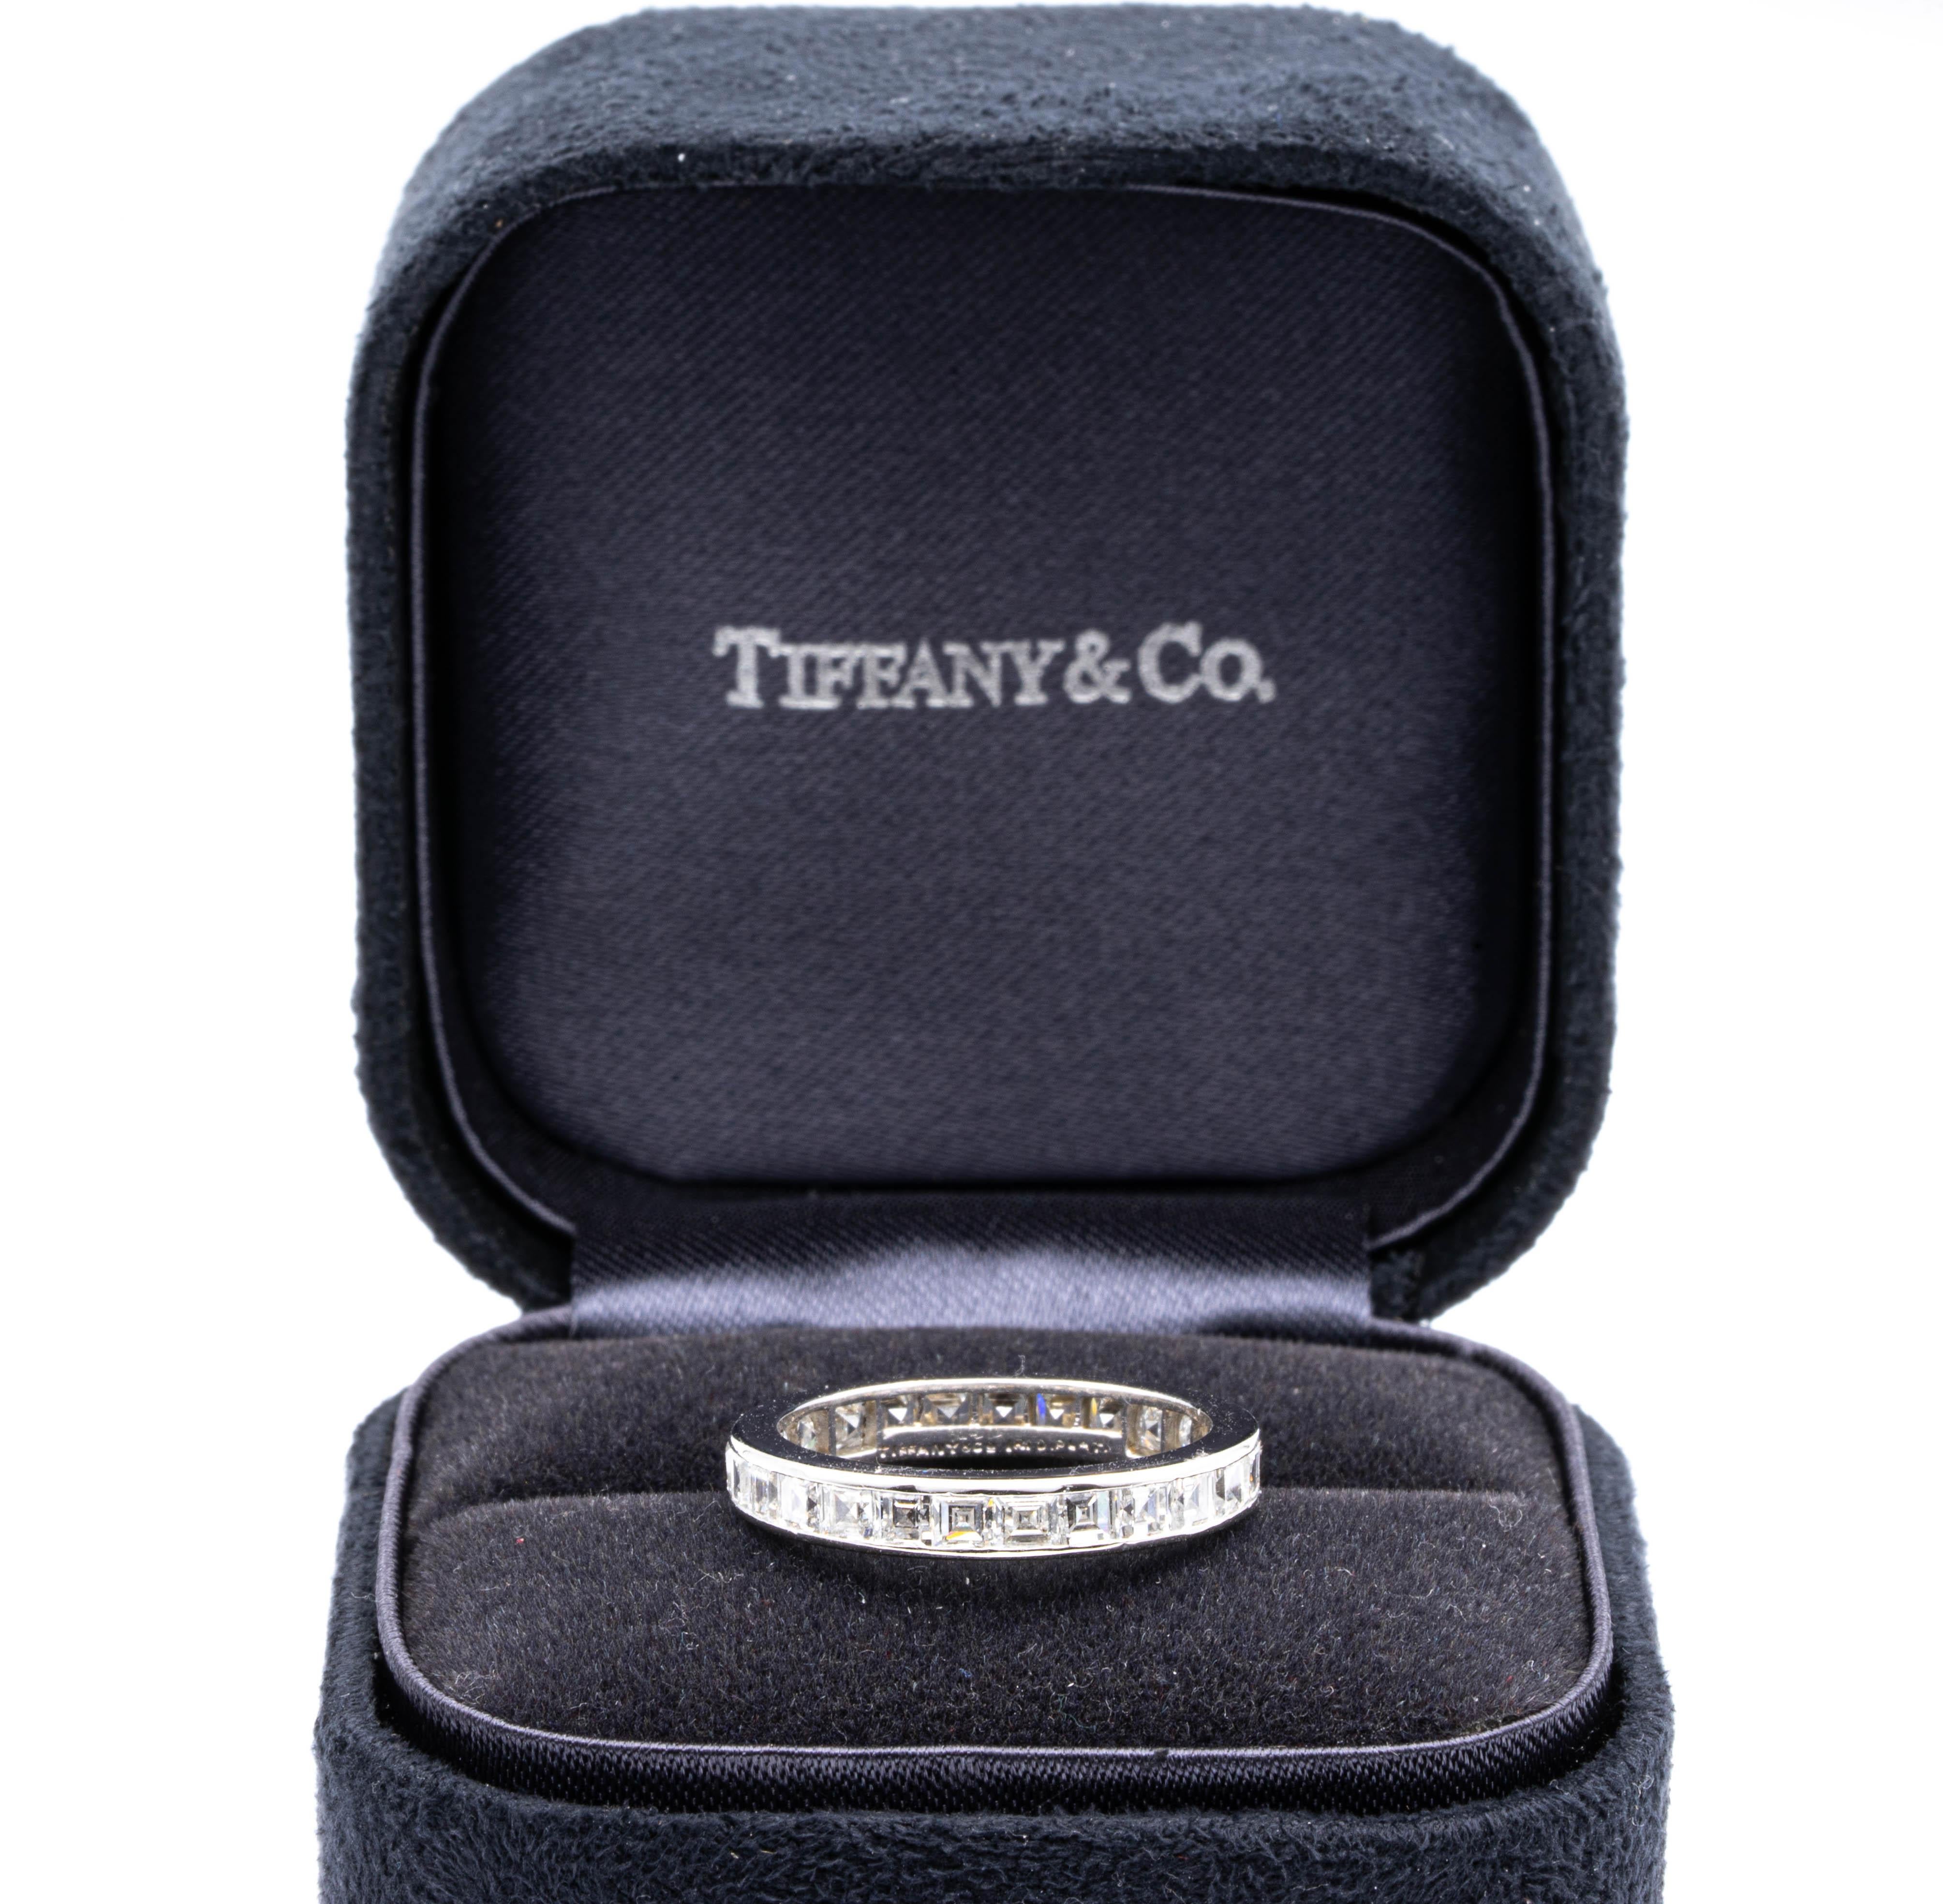 Tiffany & Co. Vintage Channel Diamond wedding band with 26 beautifully matched invisible set Carre (Asscher) cut diamonds weighing 2.00 carats total weight approximately. The diamonds are very white F color and VS clarity.  Originally Purchased from